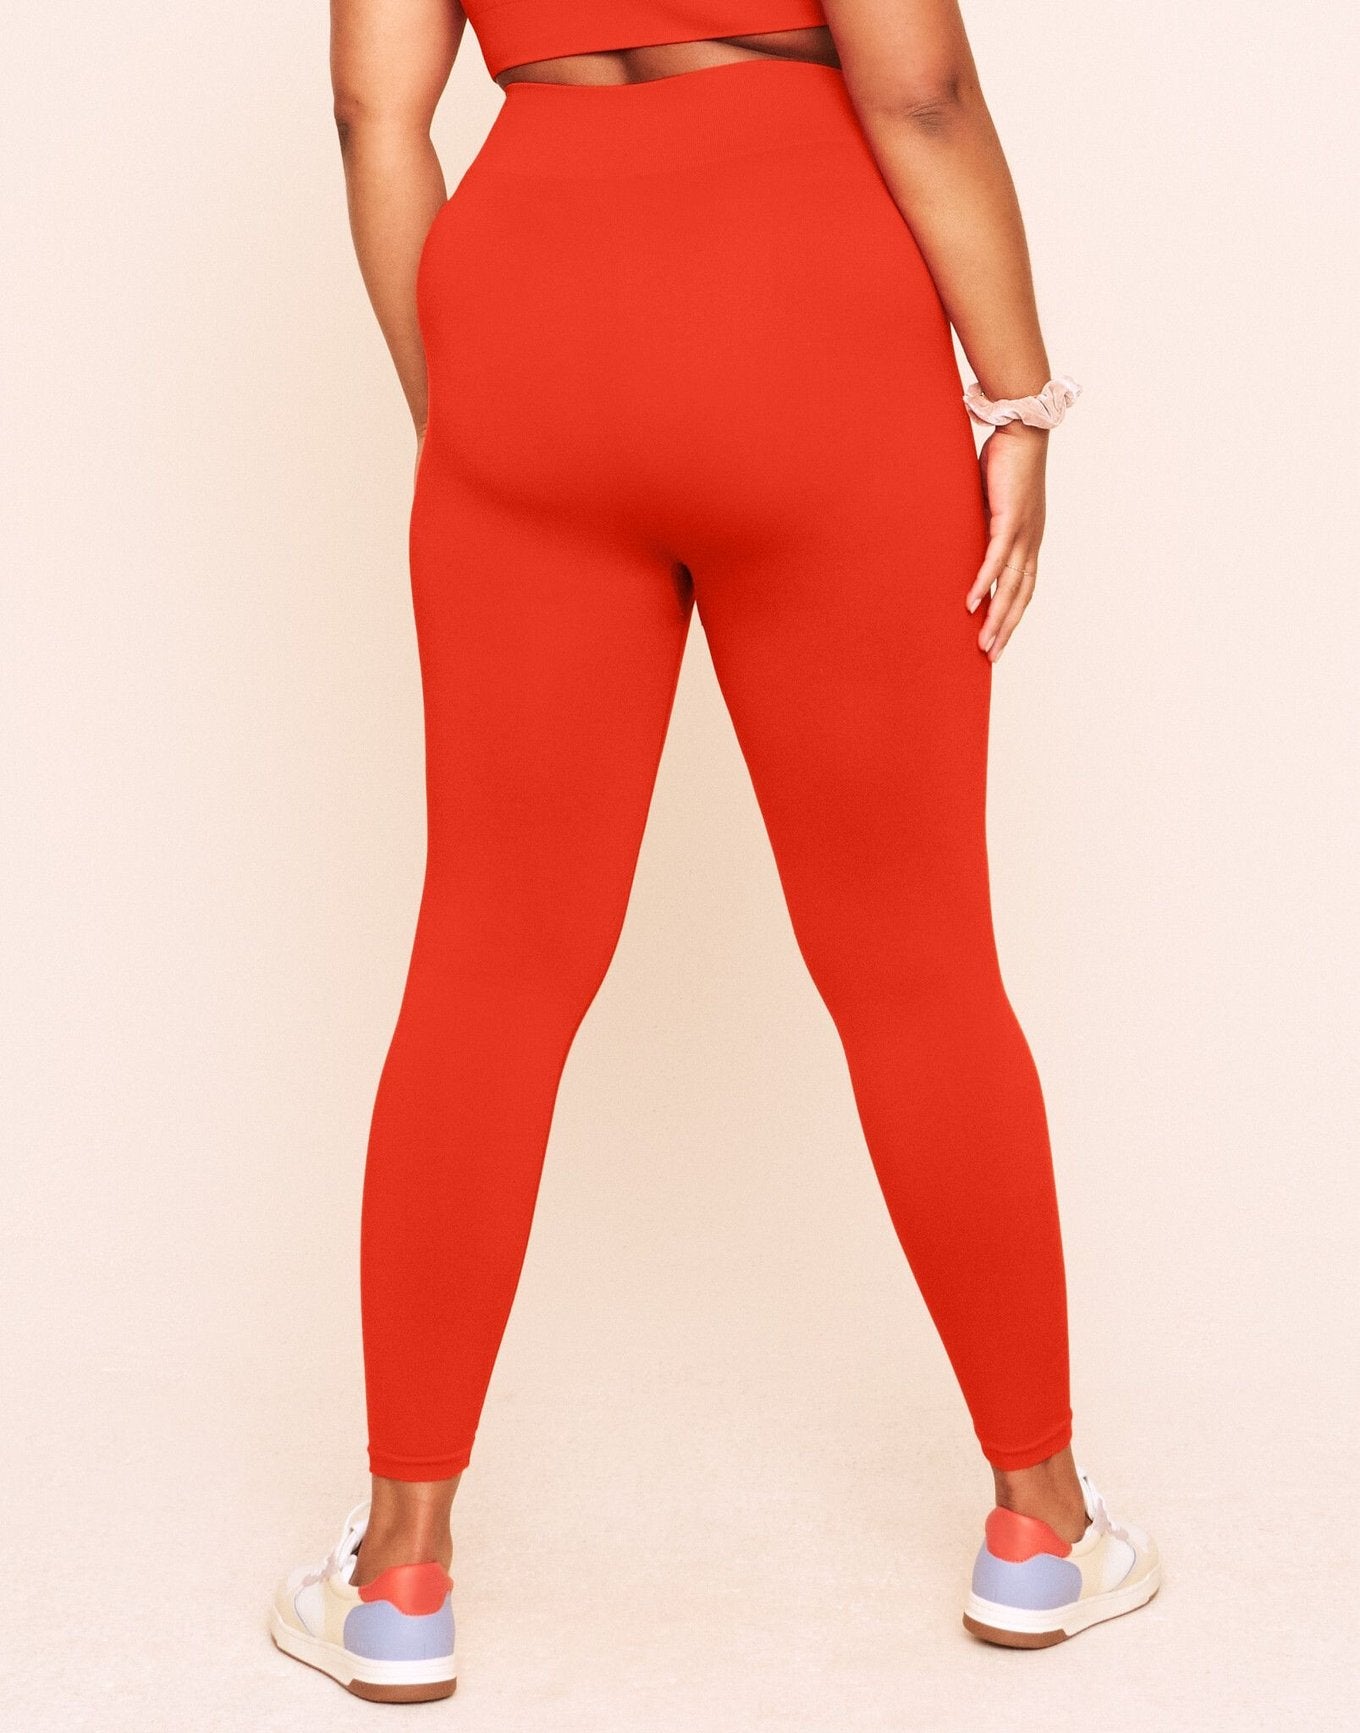 Earth Republic Lilah Ombre Full Legging Leggings in color Solid 05 - Ombre Red and shape legging